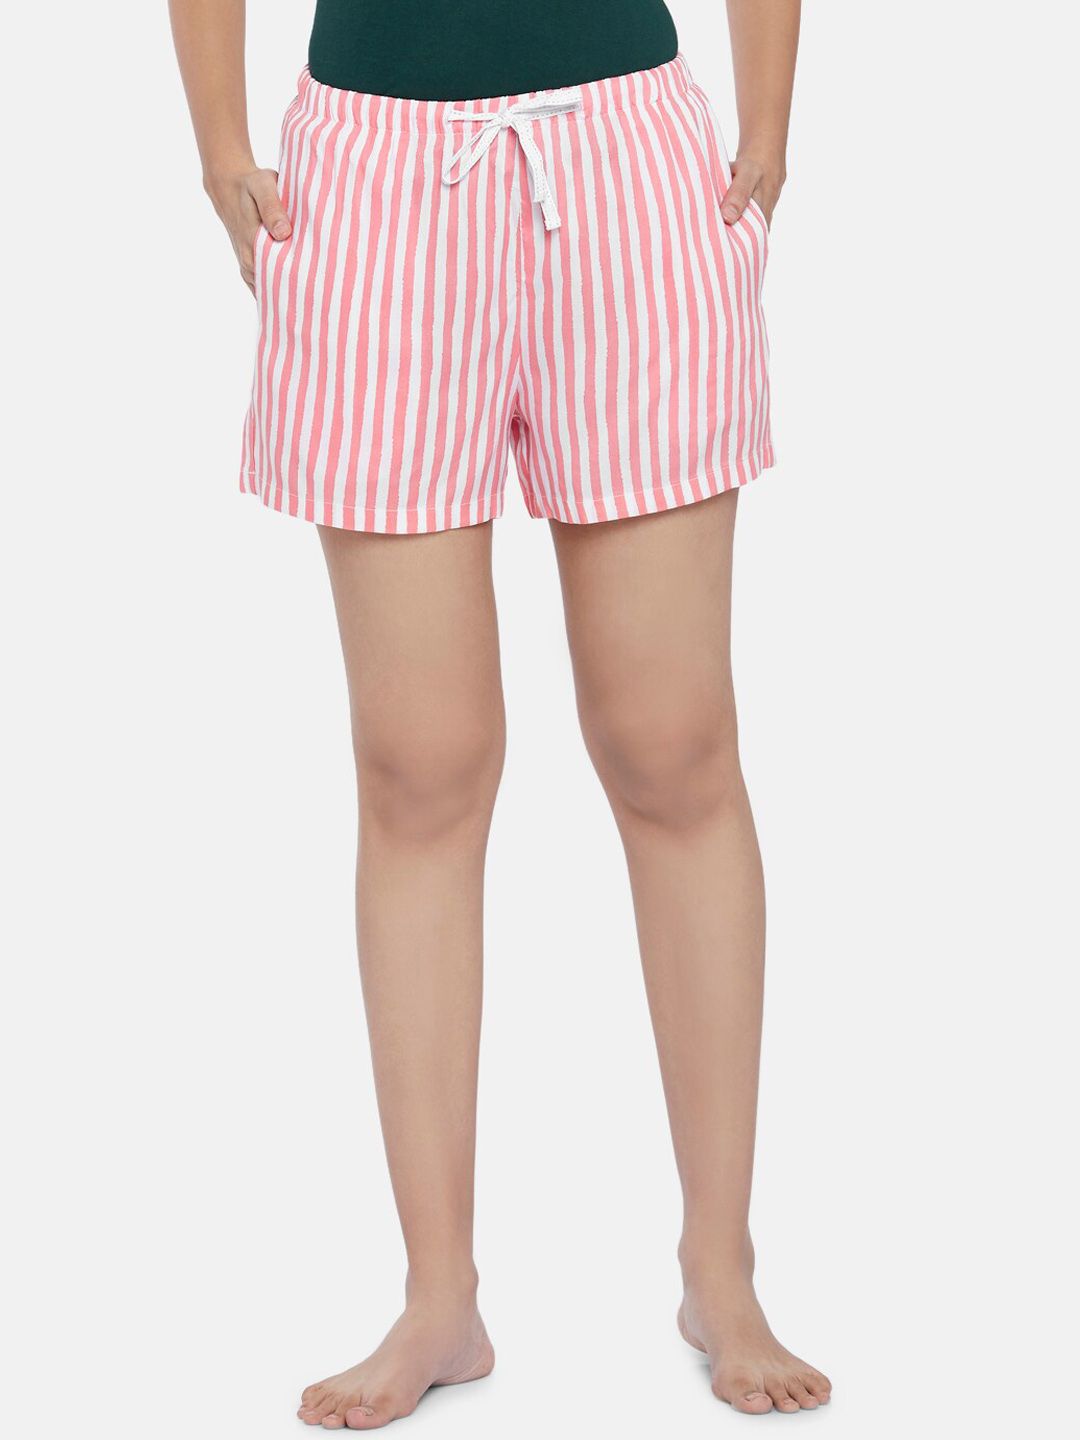 Dreamz by Pantaloons Women Coral & White Striped Lounge Shorts Price in India